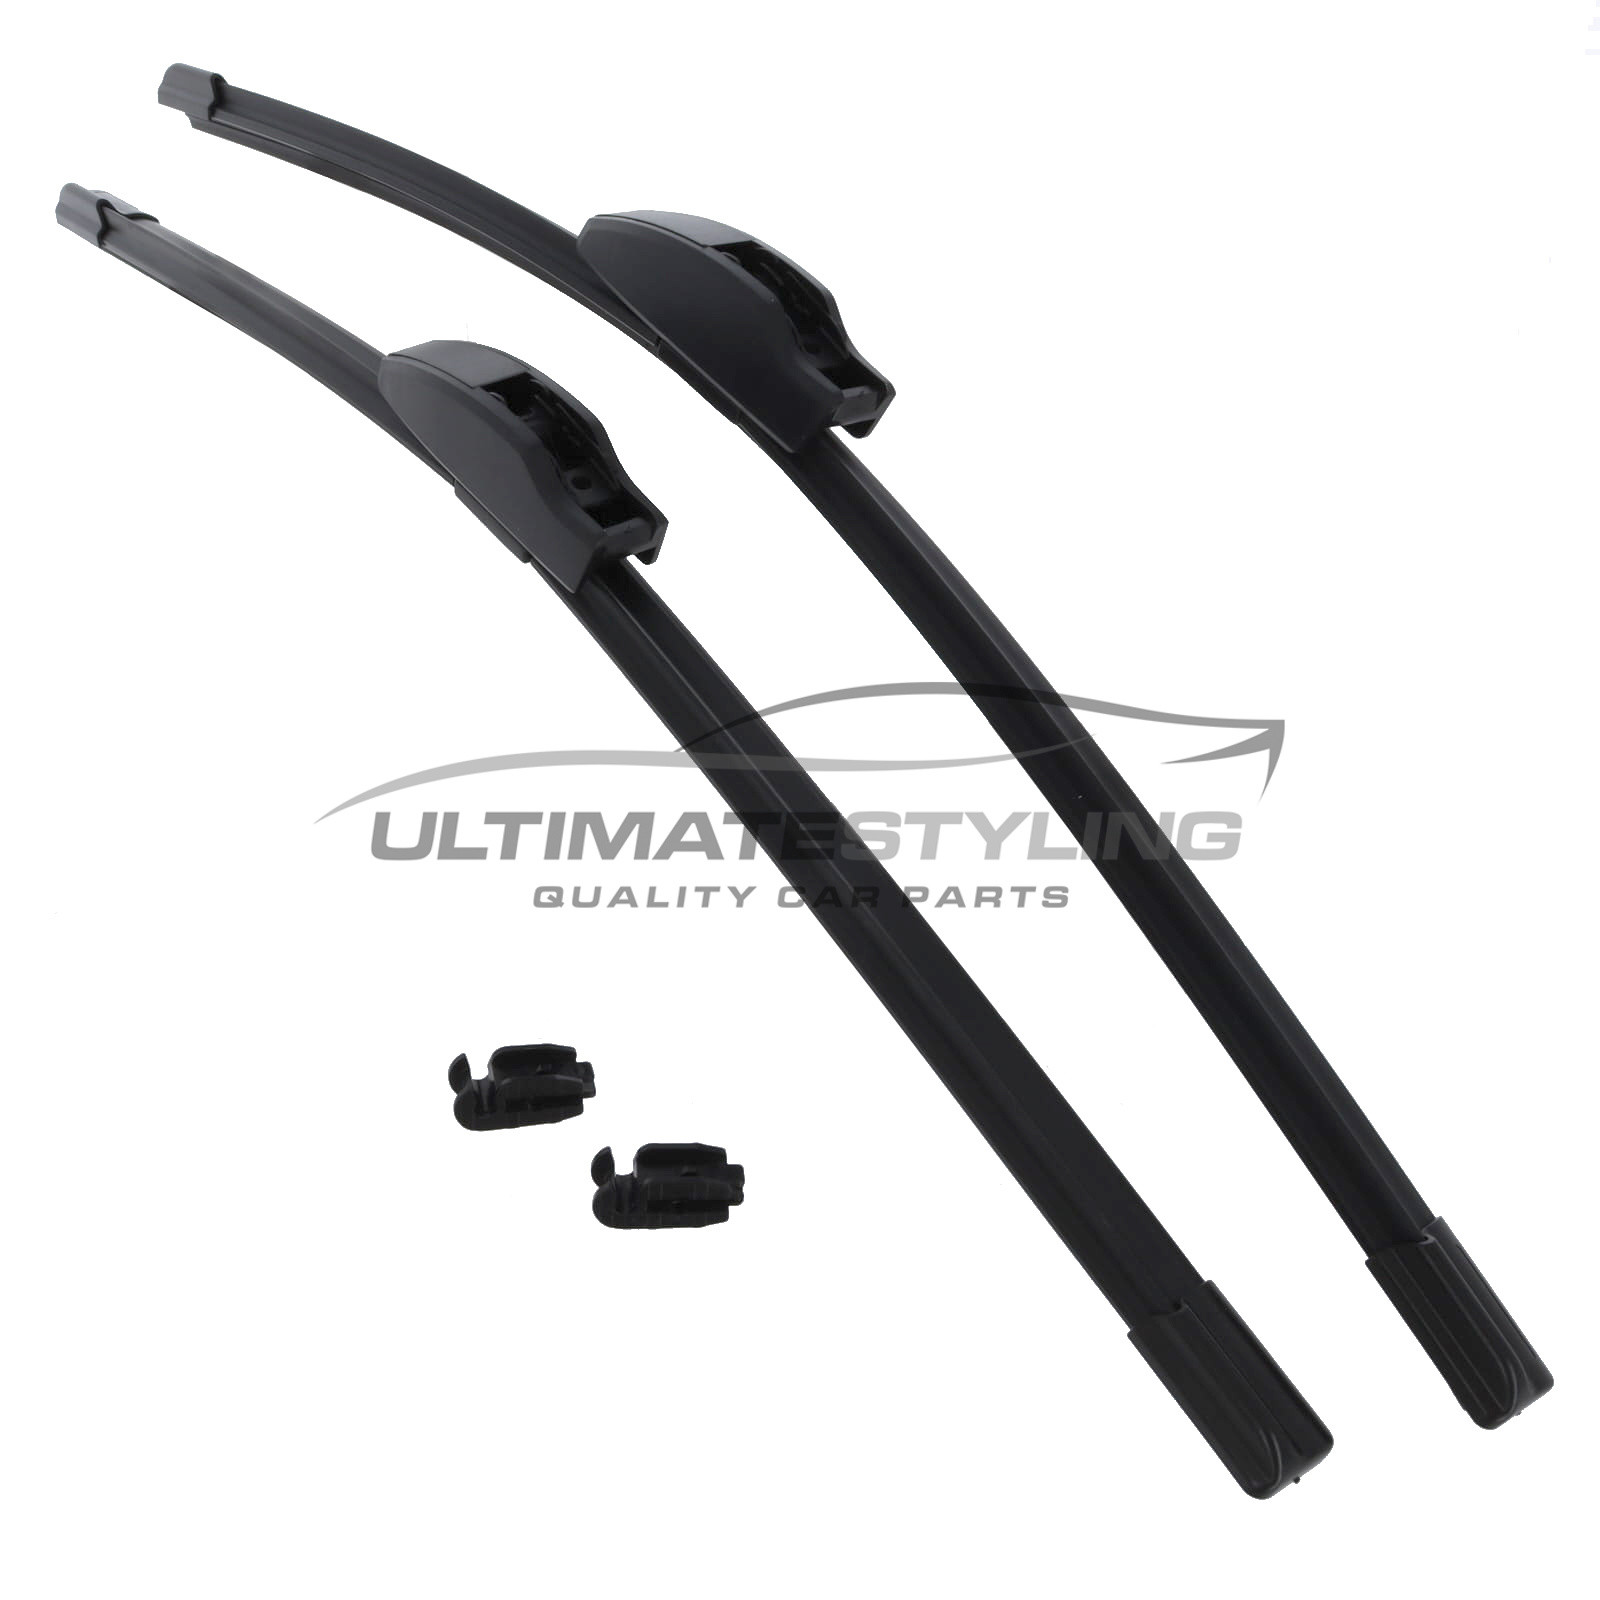 Drivers Side & Passenger Side (Front) Wiper Blades for Mitsubishi Sigma